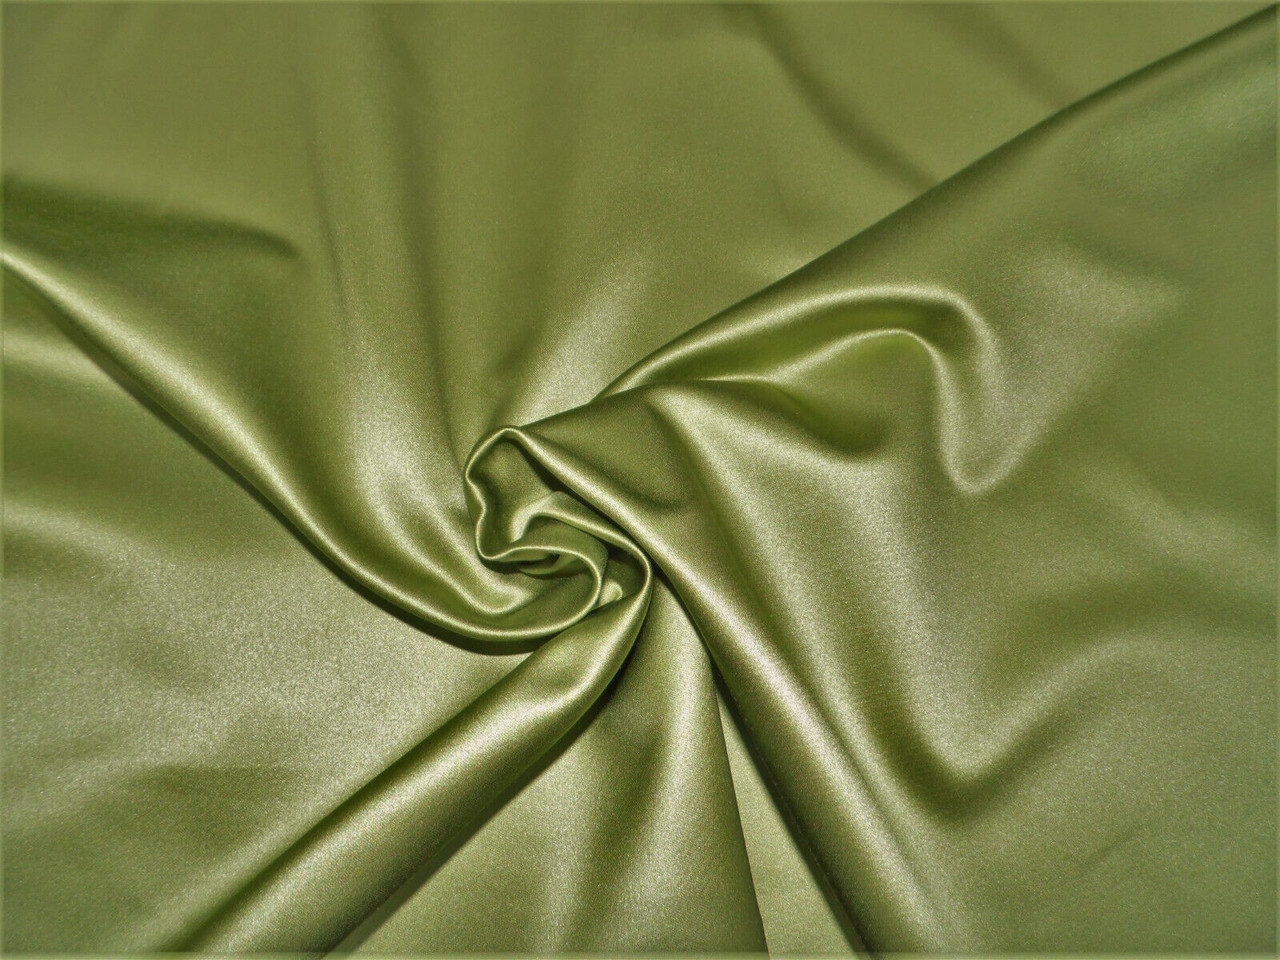 Satin Fabric vs Sateen Fabric? Is There a Difference? – Nancy's